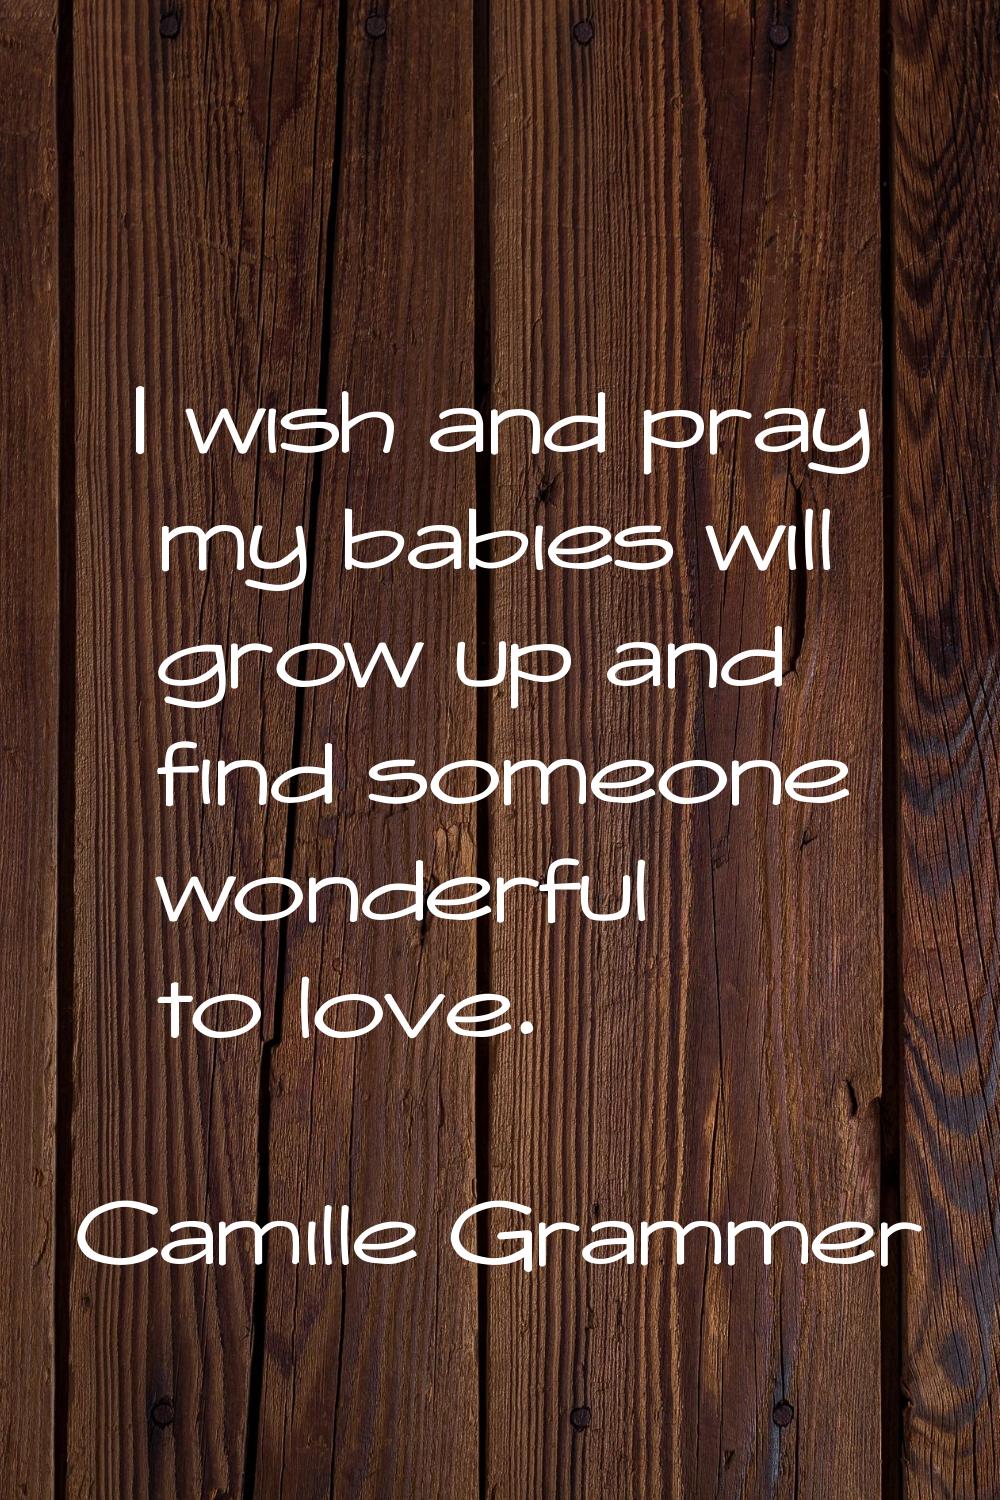 I wish and pray my babies will grow up and find someone wonderful to love.